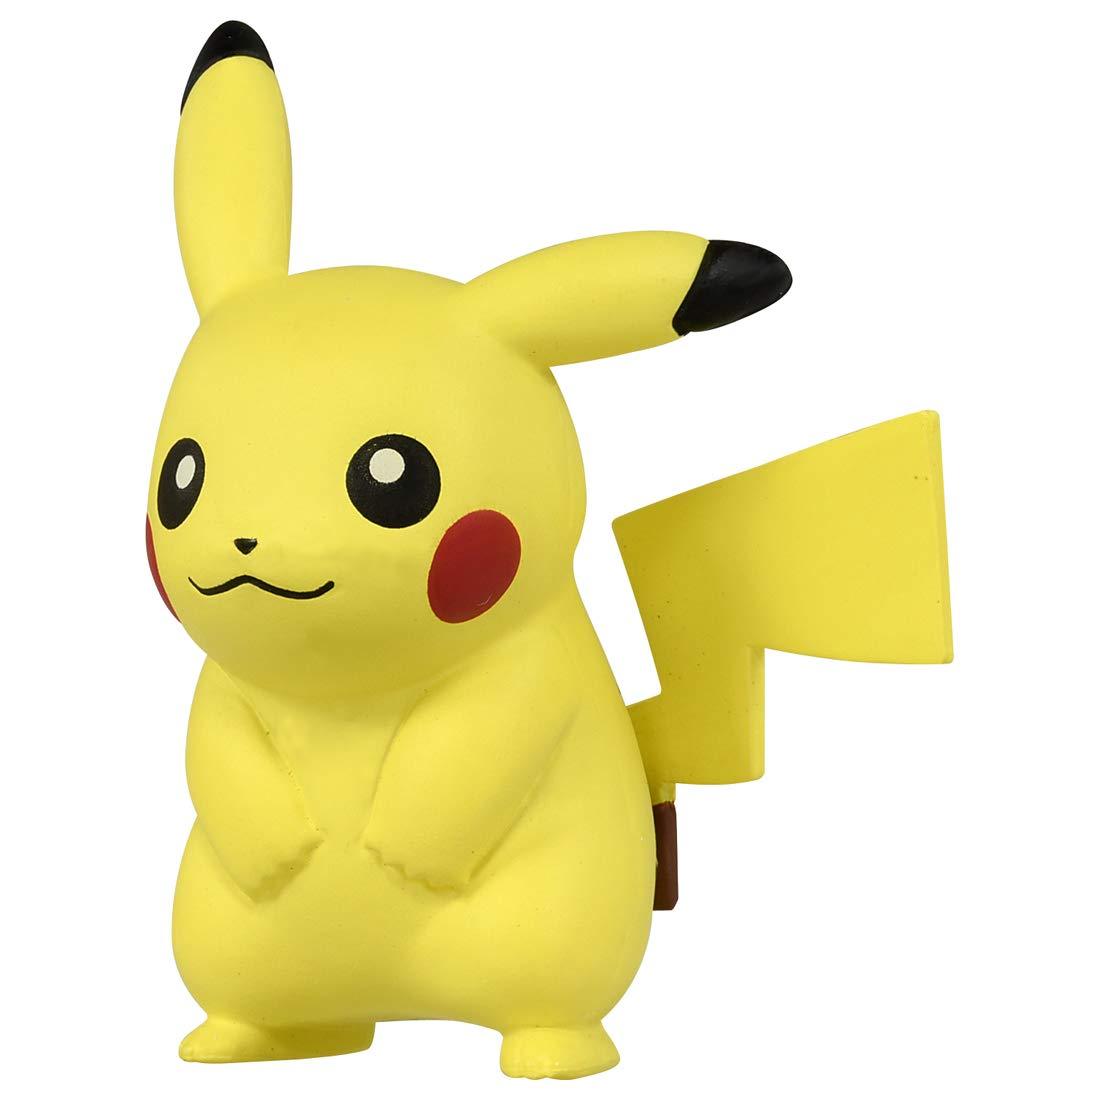 Pokemon Moncolle "Pikachu" (MS-01)-Takara Tomy-Ace Cards & Collectibles